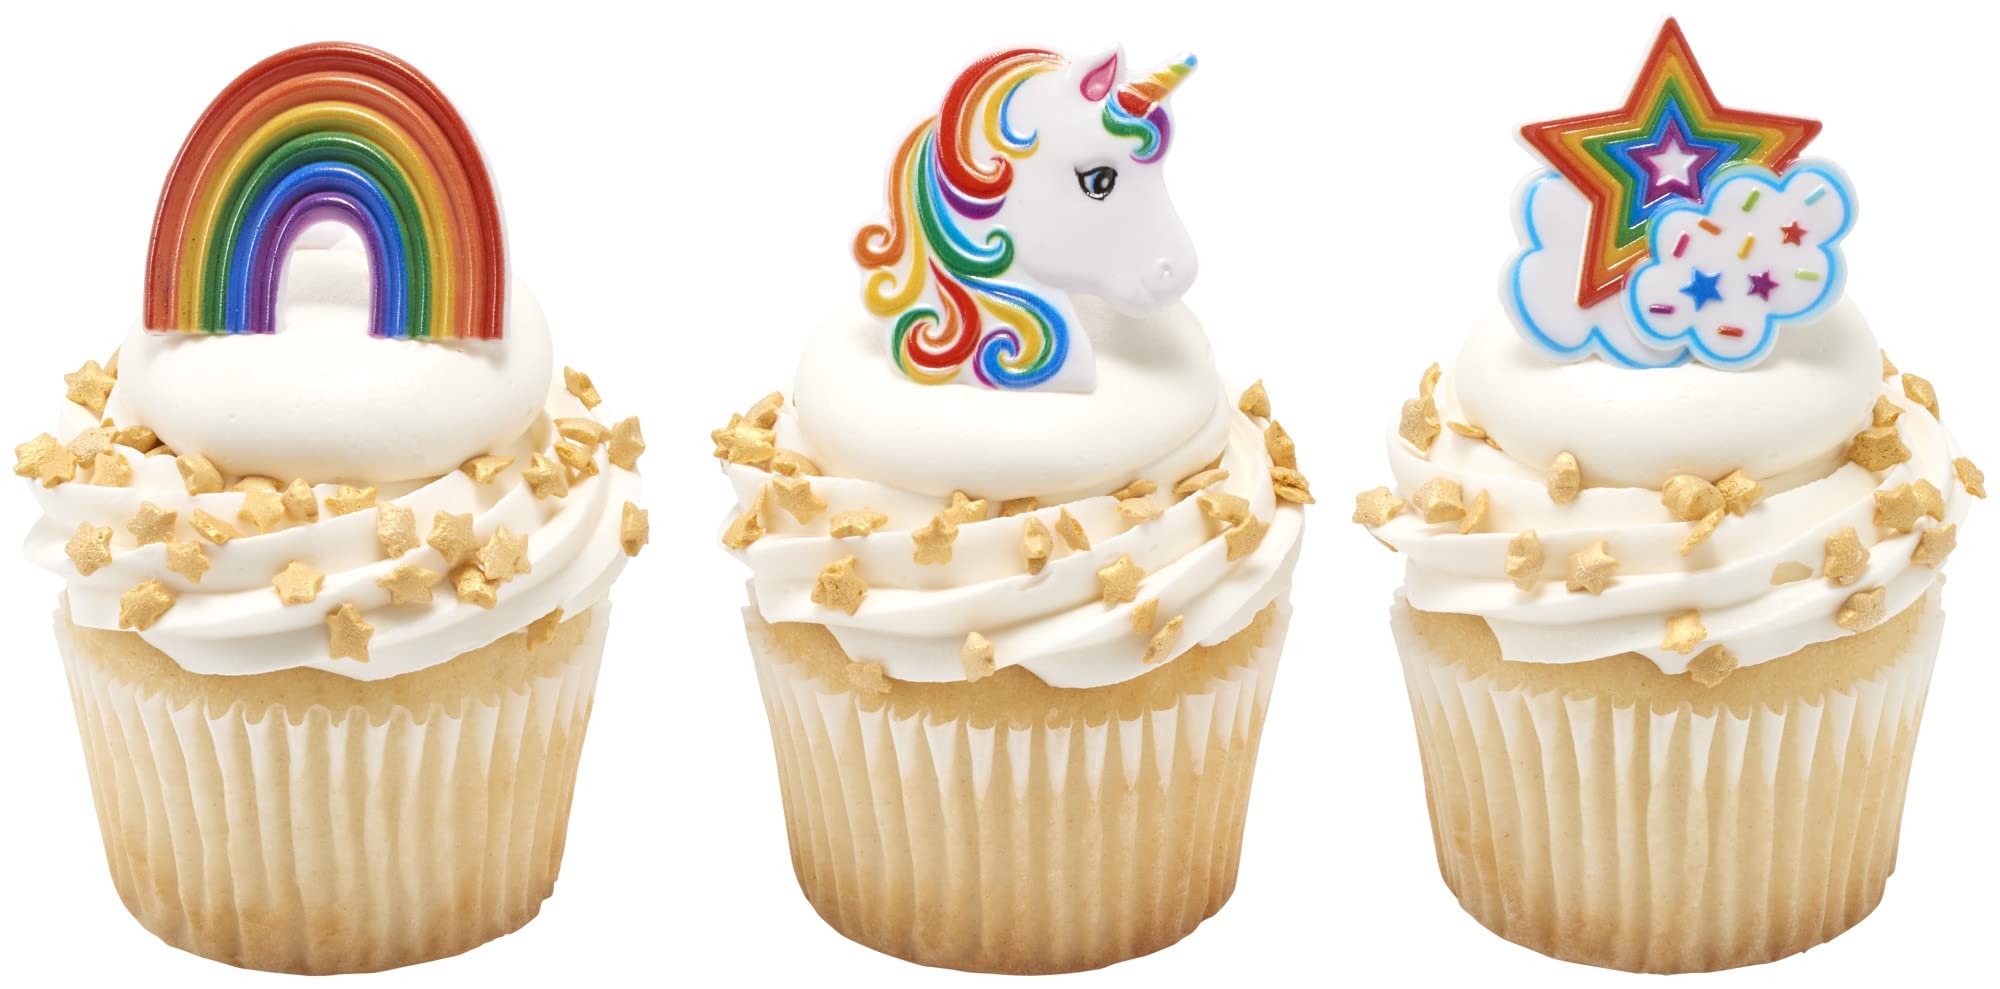 DECOPAC Rainbow Unicorn Rings, Cupcake Decorations, Magical Food Safe Cake Toppers – 24 Pack, Multicolor